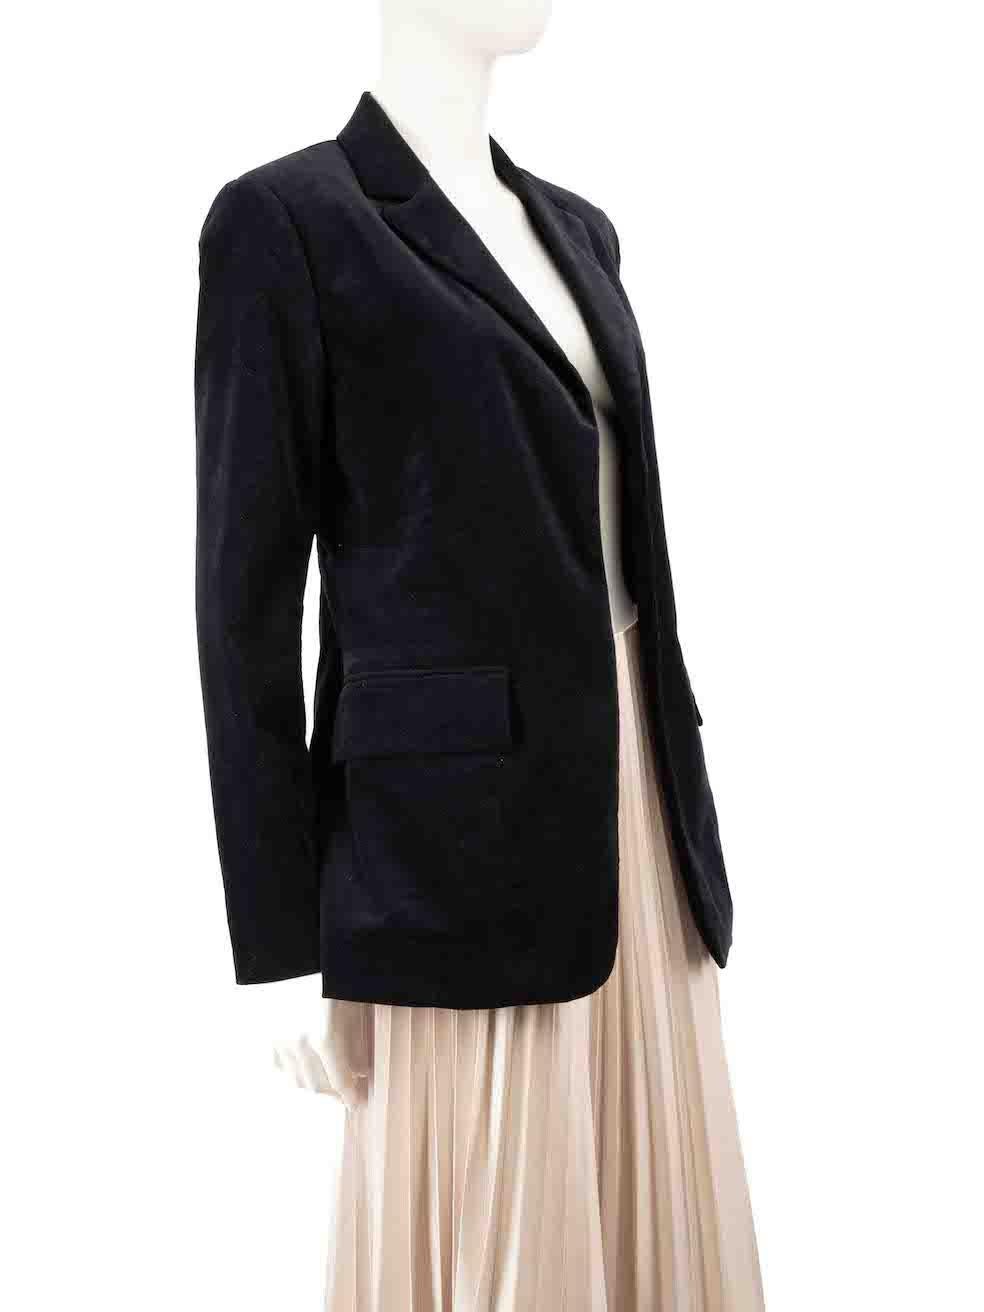 CONDITION is Very good. Hardly any visible wear to blazer is evident on this used Sportmax designer resale item.
 
 
 
 Details
 
 
 Navy
 
 Velvet
 
 Blazer
 
 Shoulder pads
 
 Open front
 
 2x Front pockets
 
 
 
 
 
 Made in Italy
 
 
 
